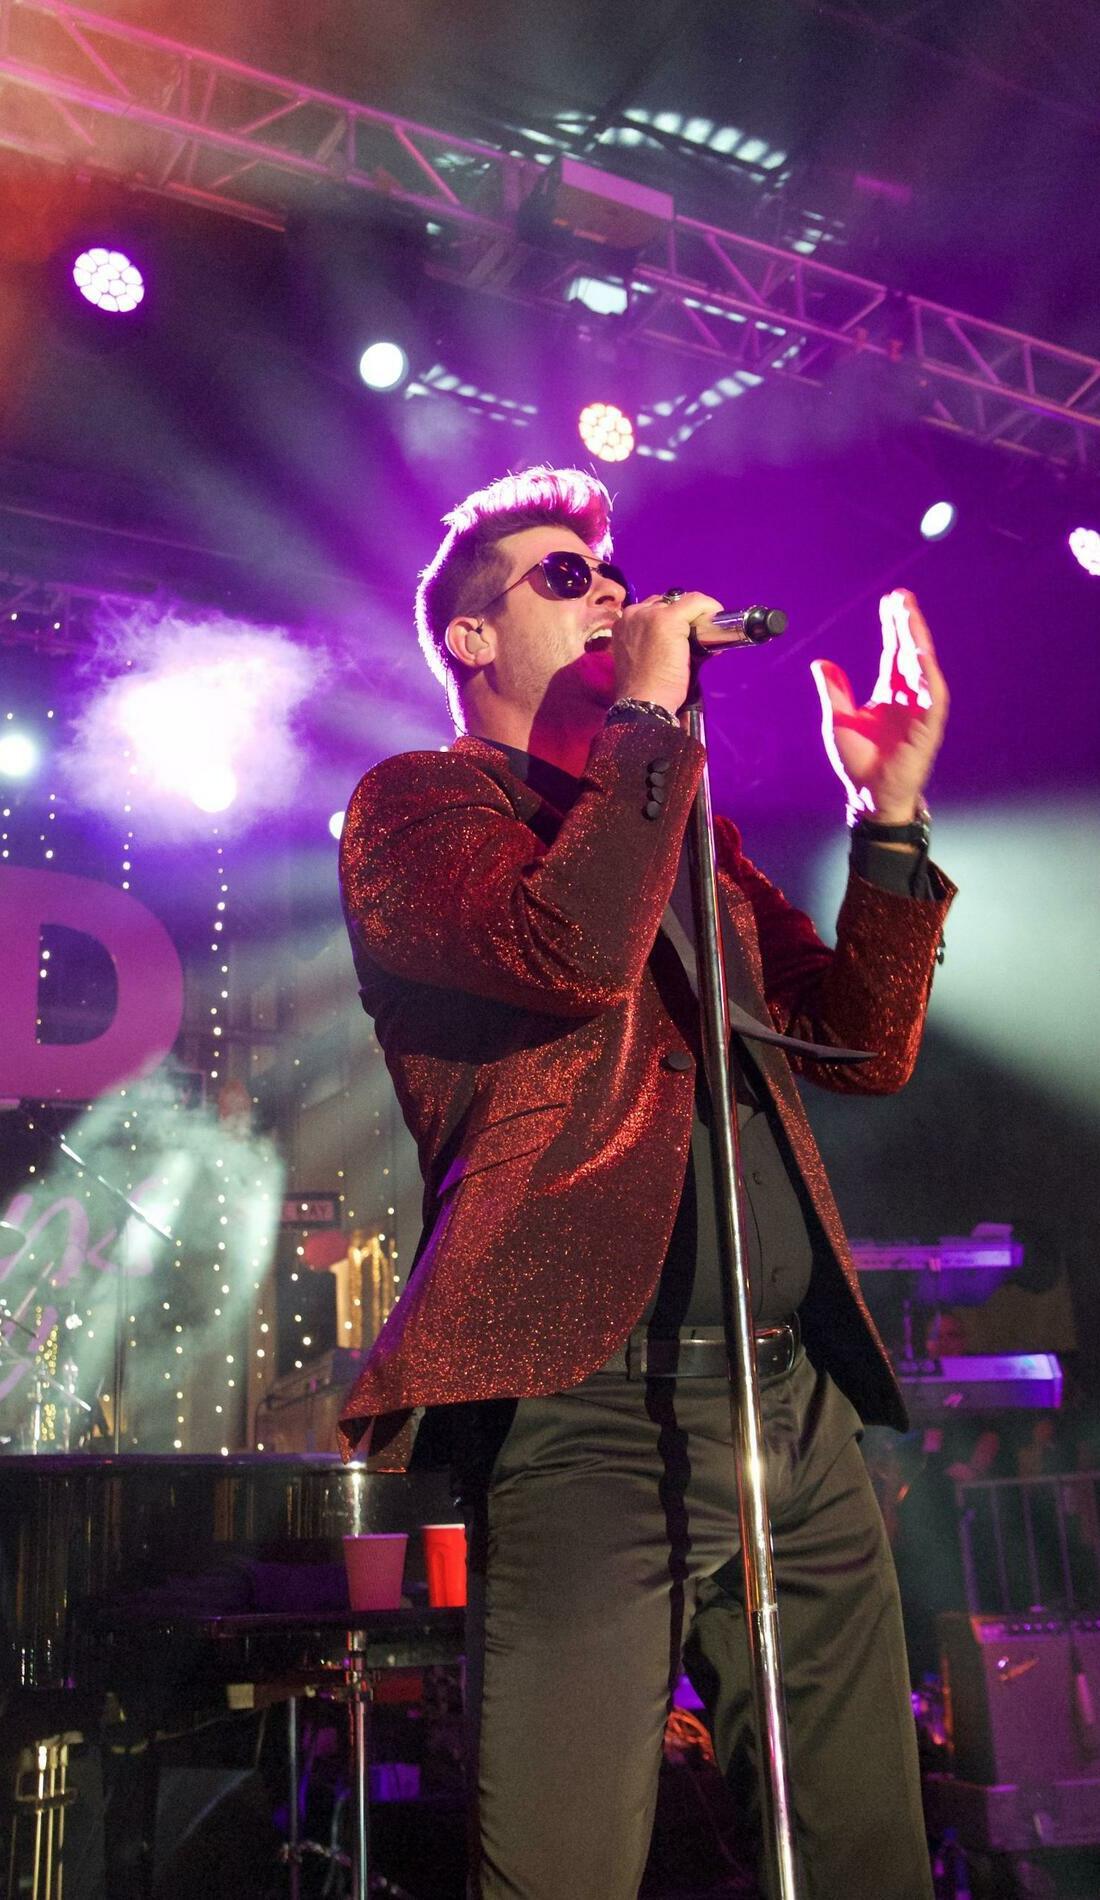 Robin Thicke to perform at Dodger Stadium on Opening Weekend